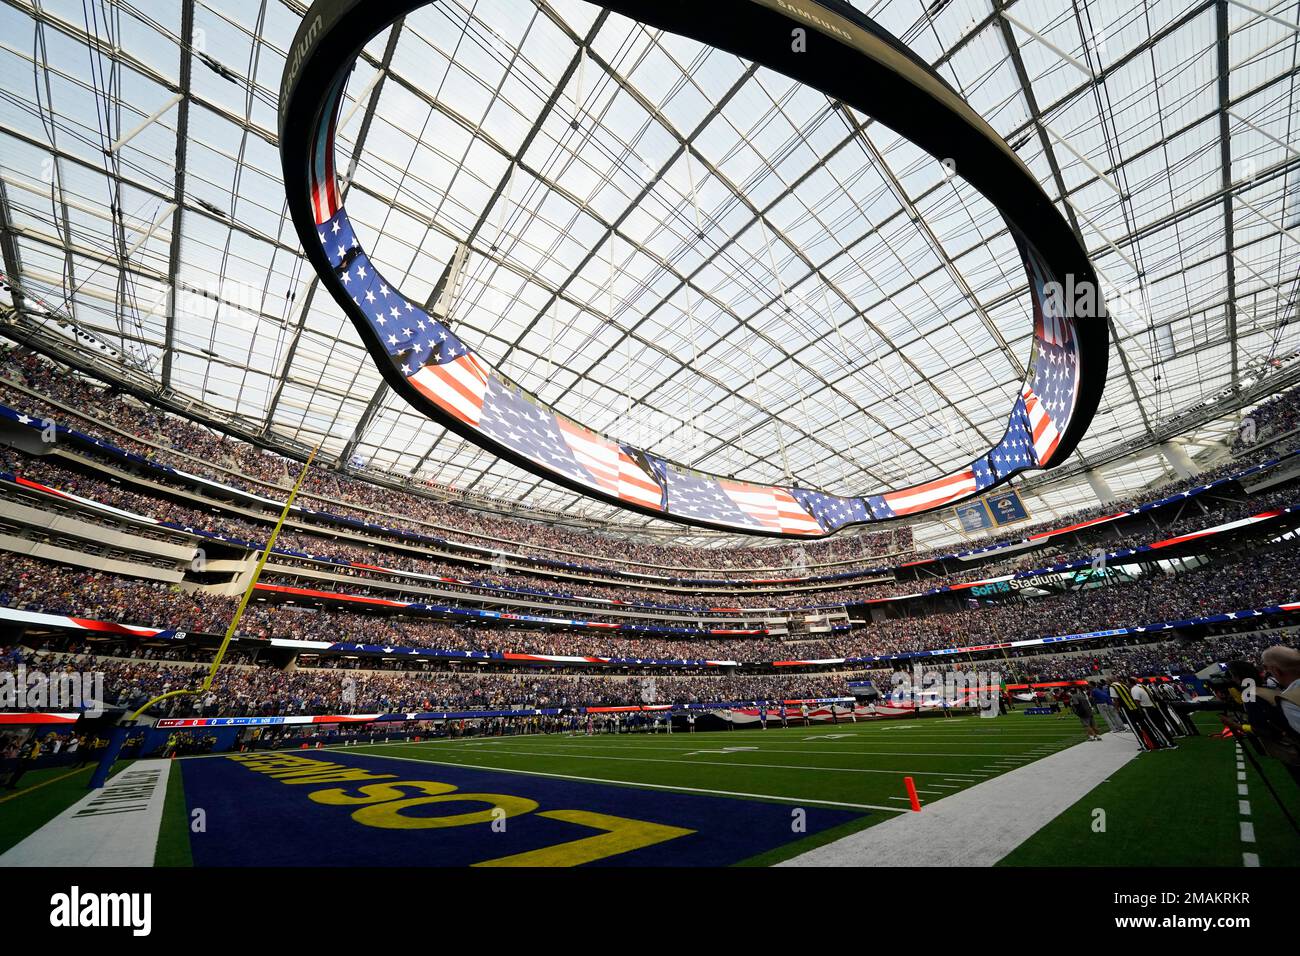 Overall view of SoFi Stadium as the Los Angeles Rams play the